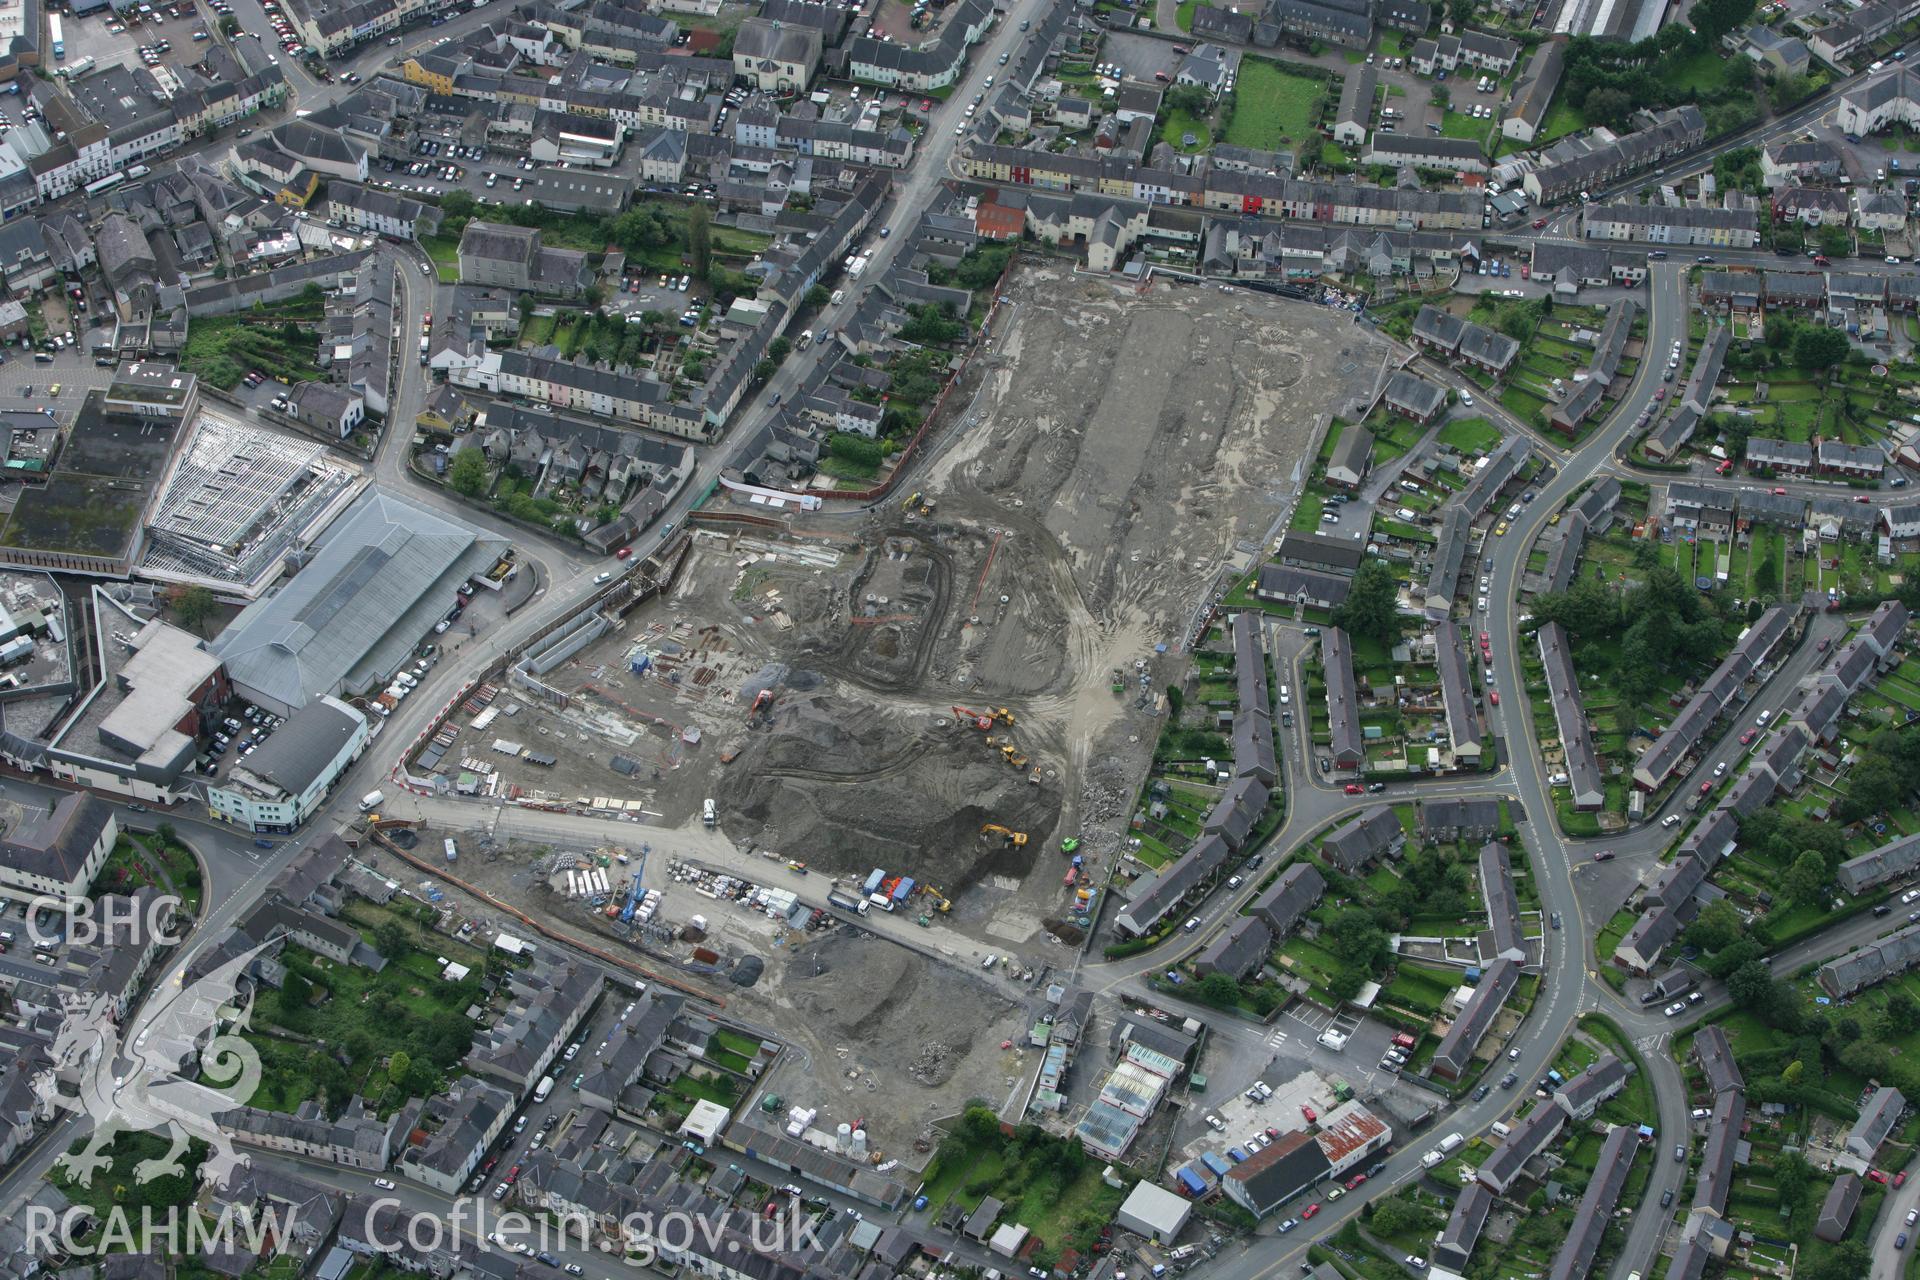 RCAHMW colour oblique photograph of Carmarthen Old Provision Market, with development works for the St Catherine Shopping Centre. Taken by Toby Driver on 12/09/2008.